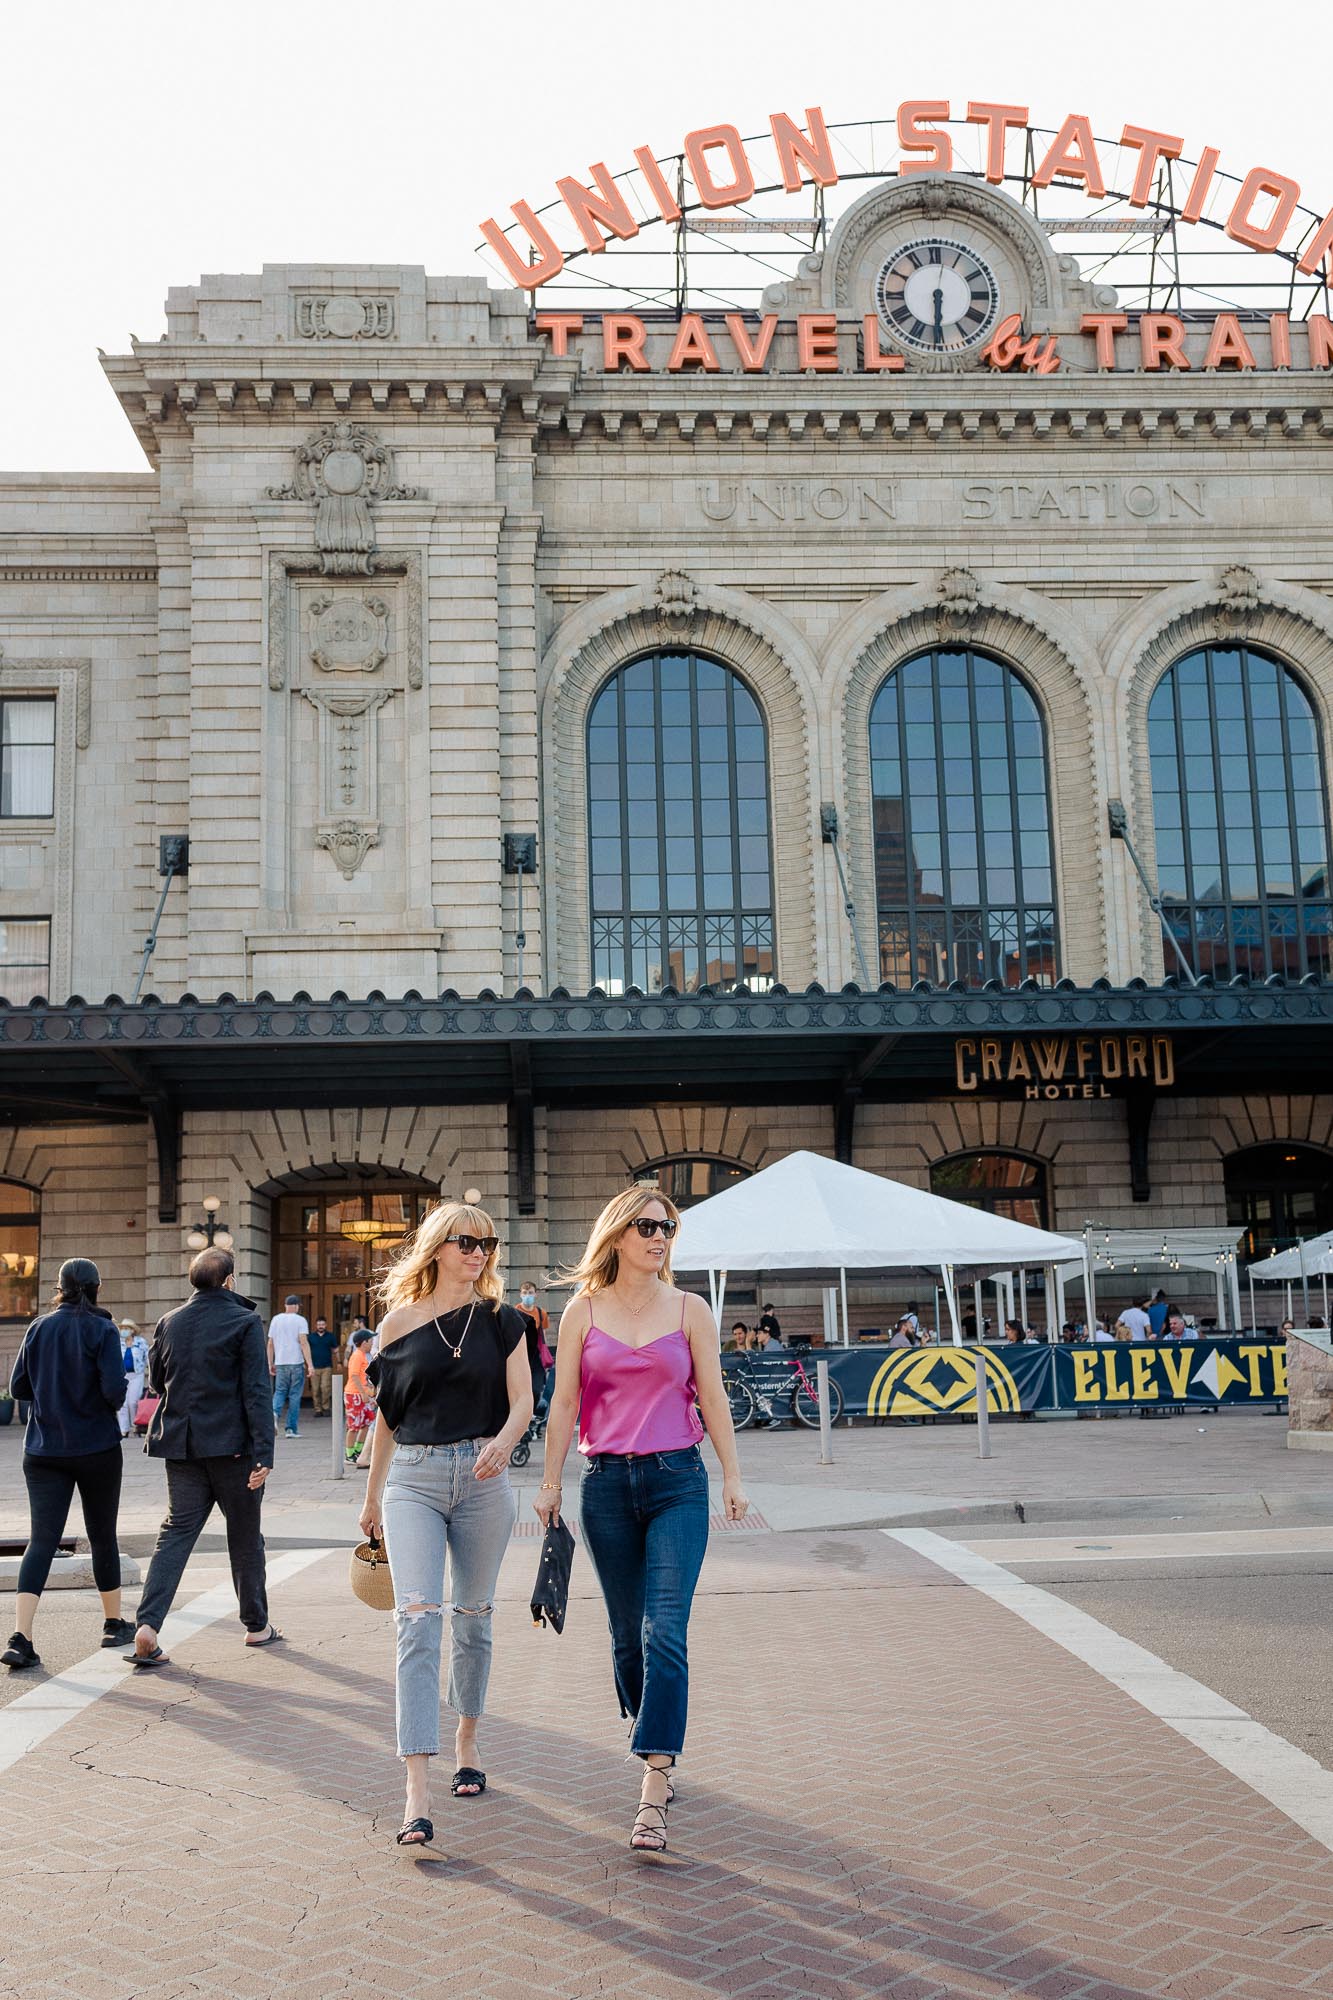 Rachel & Tammy walking out of Union Station in Denver wearing a pink camisole and black top.